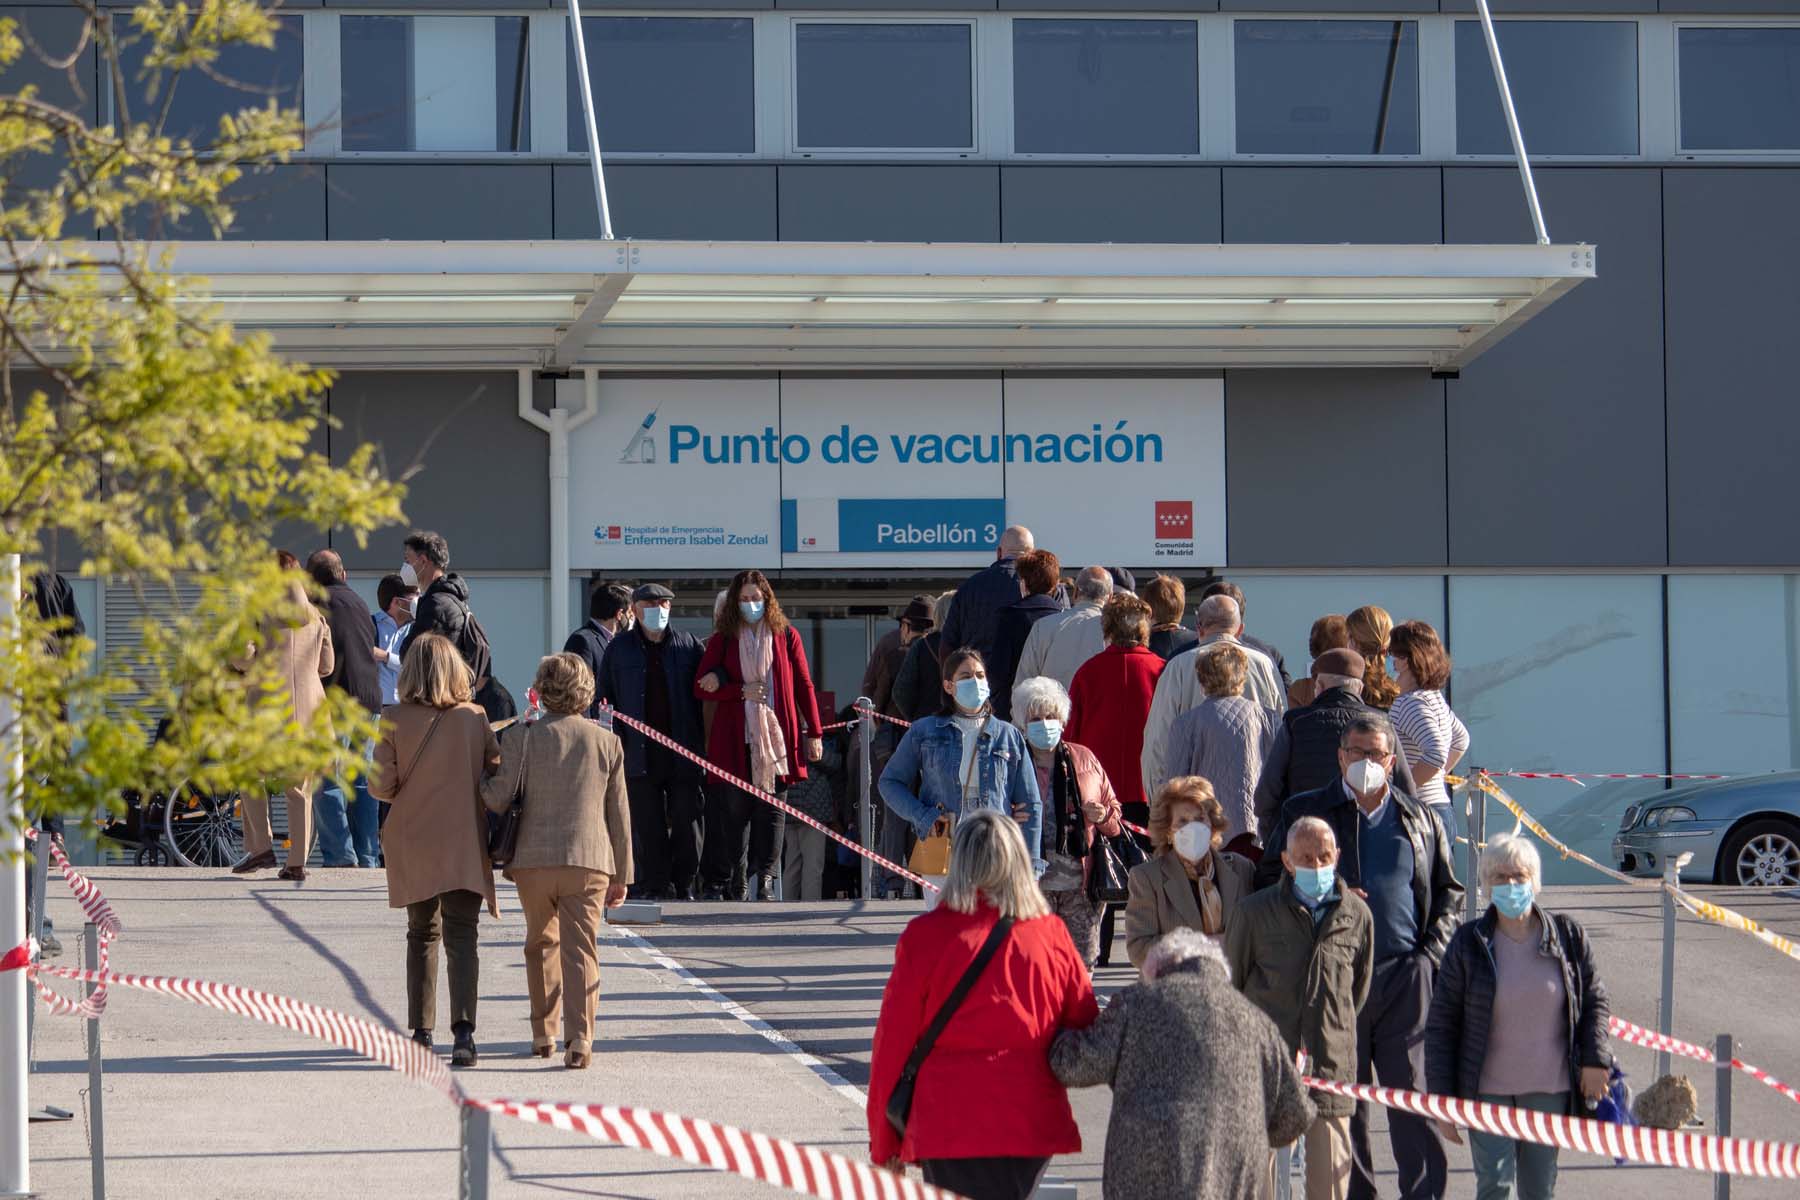 vaccination center in Spain